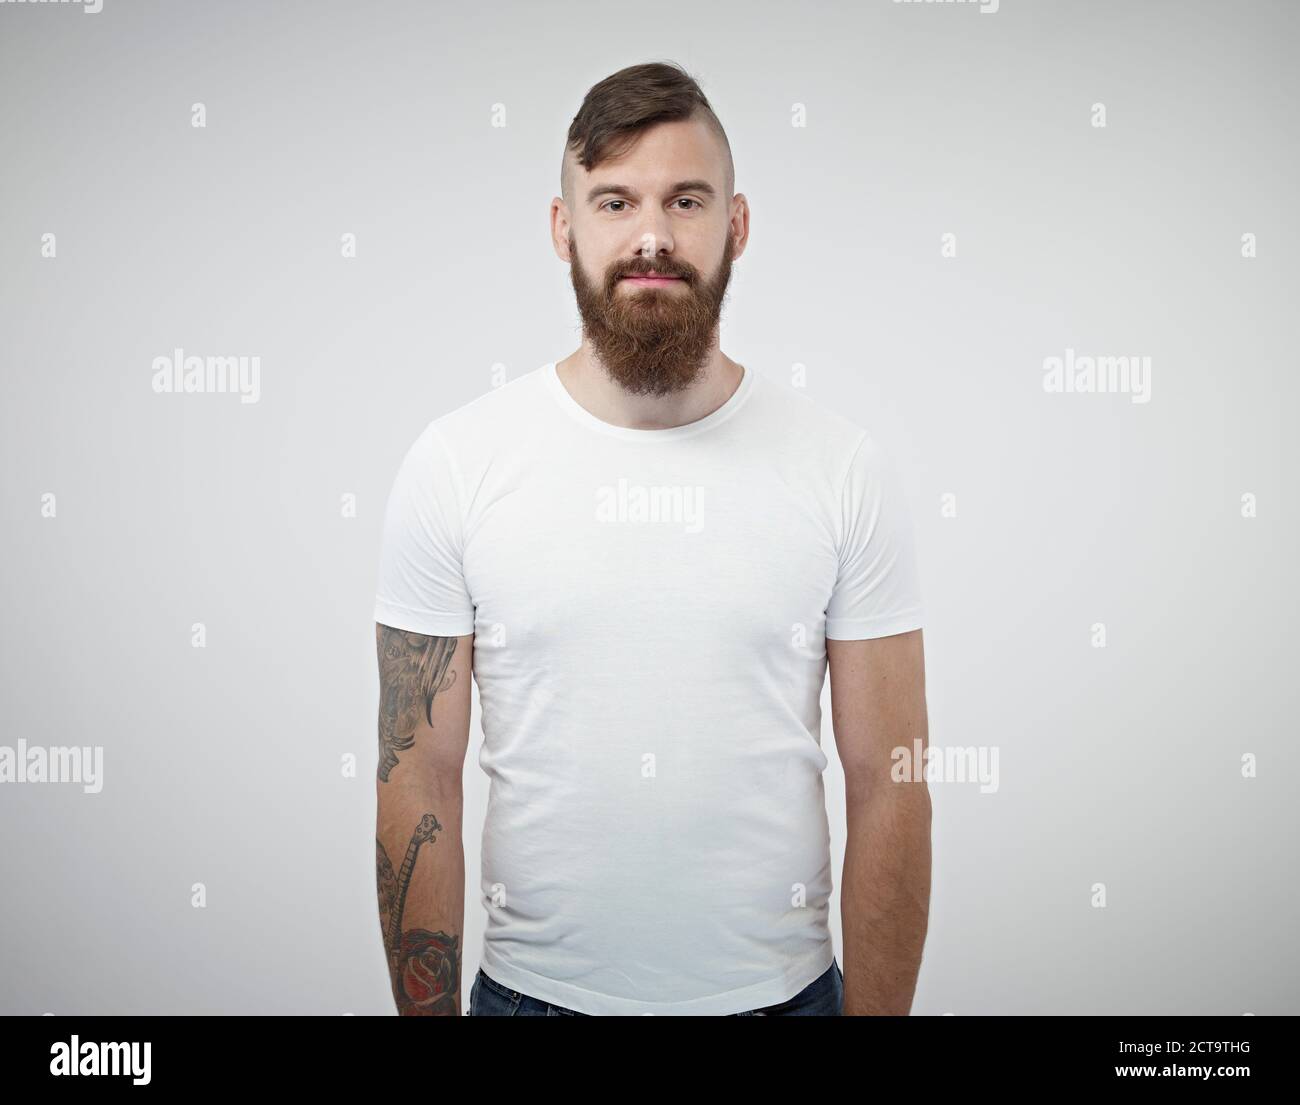 Portrait of smiling young man with shaved head, full beard and tattoo Stock Photo